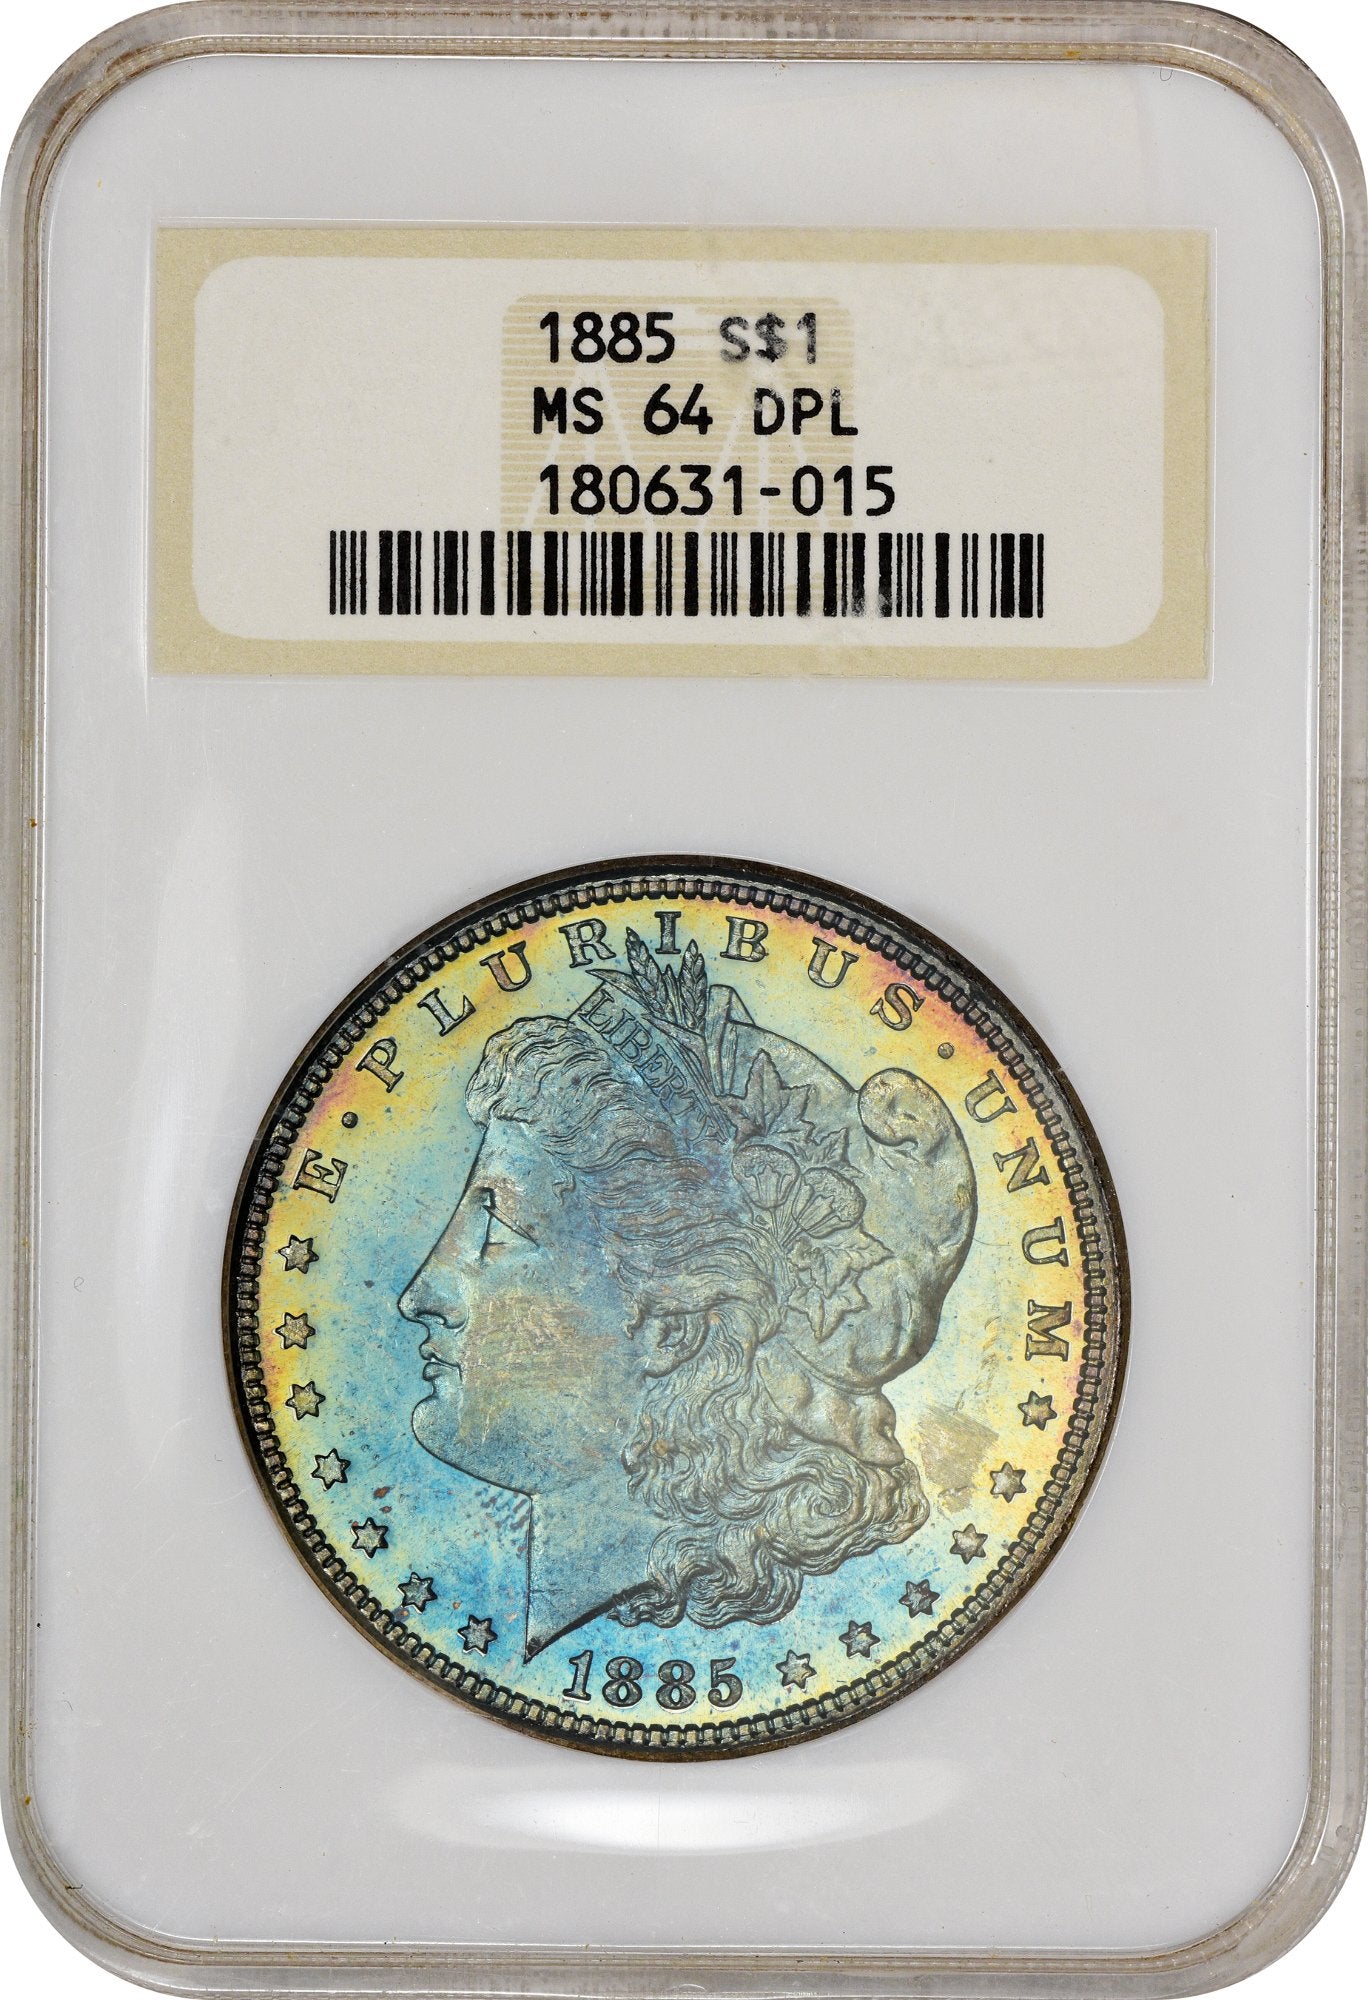 1885 $1 MS64 DMPL OH NGC - Paradime Coins US Coins For Sale